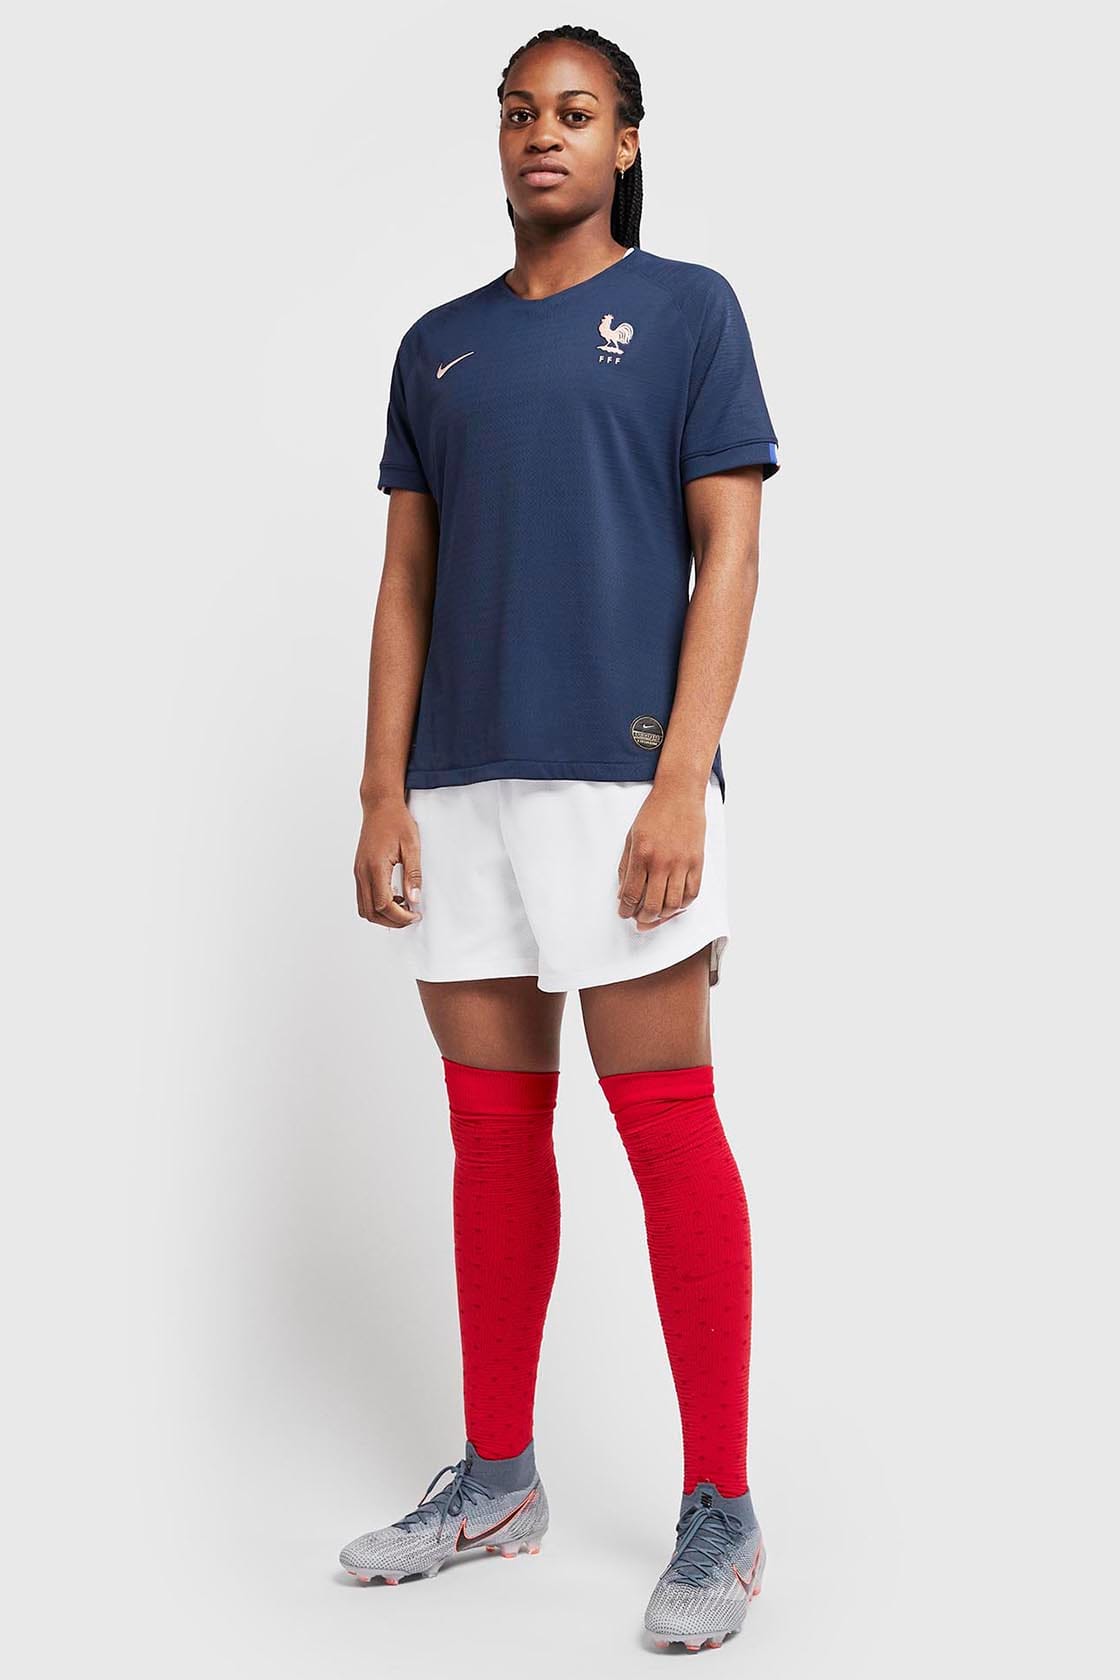 france women's world cup kit